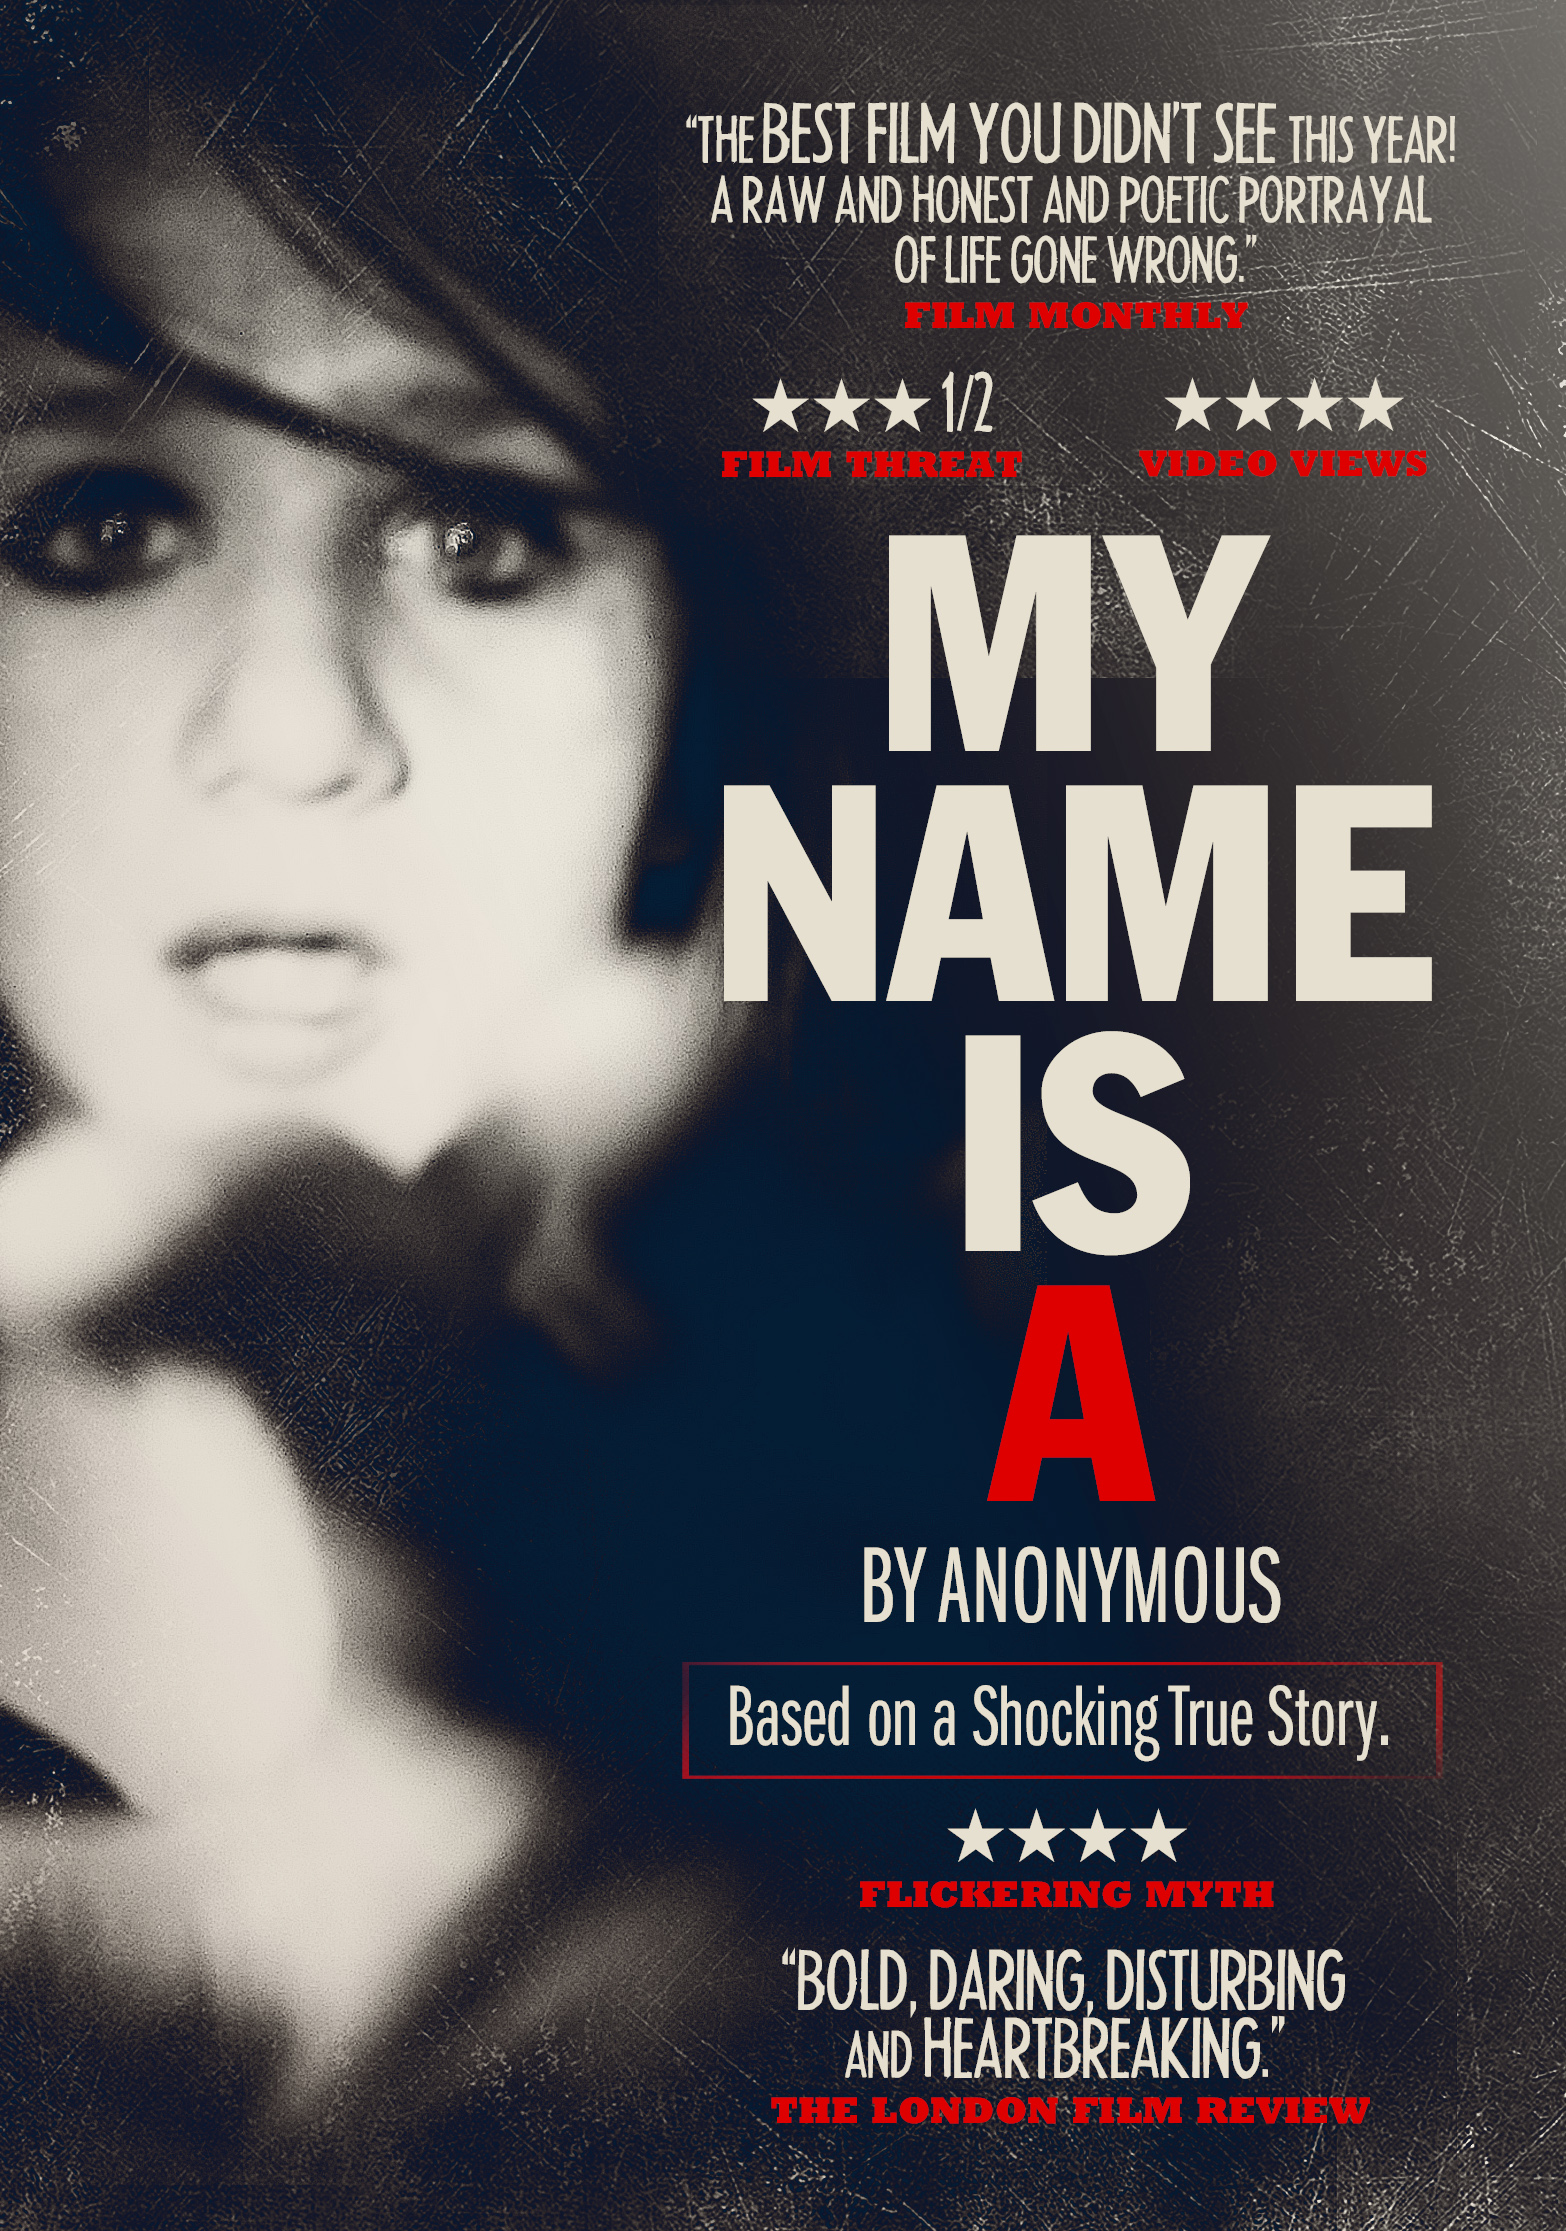 My Name Is 'A' by Anonymous (2012) Screenshot 3